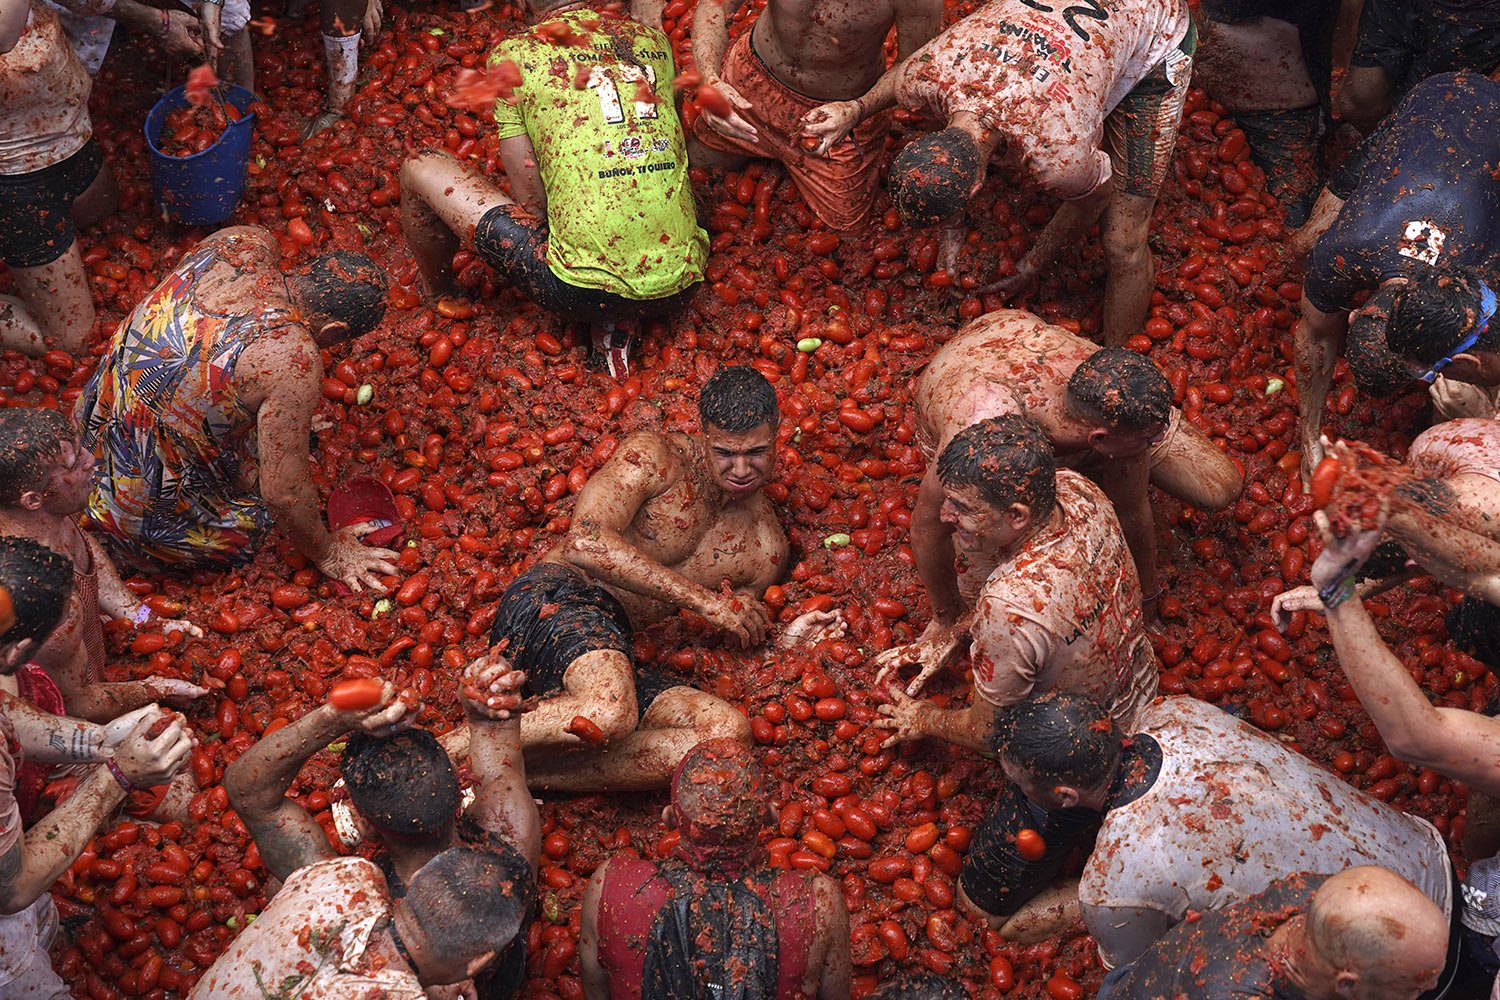  Participants bask in puddles of squashed tomatoes during the annual "Tomatina" street battle, in Bunol, Spain, Wednesday, Aug. 30, 2023. (AP Photo/Alberto Saiz) 